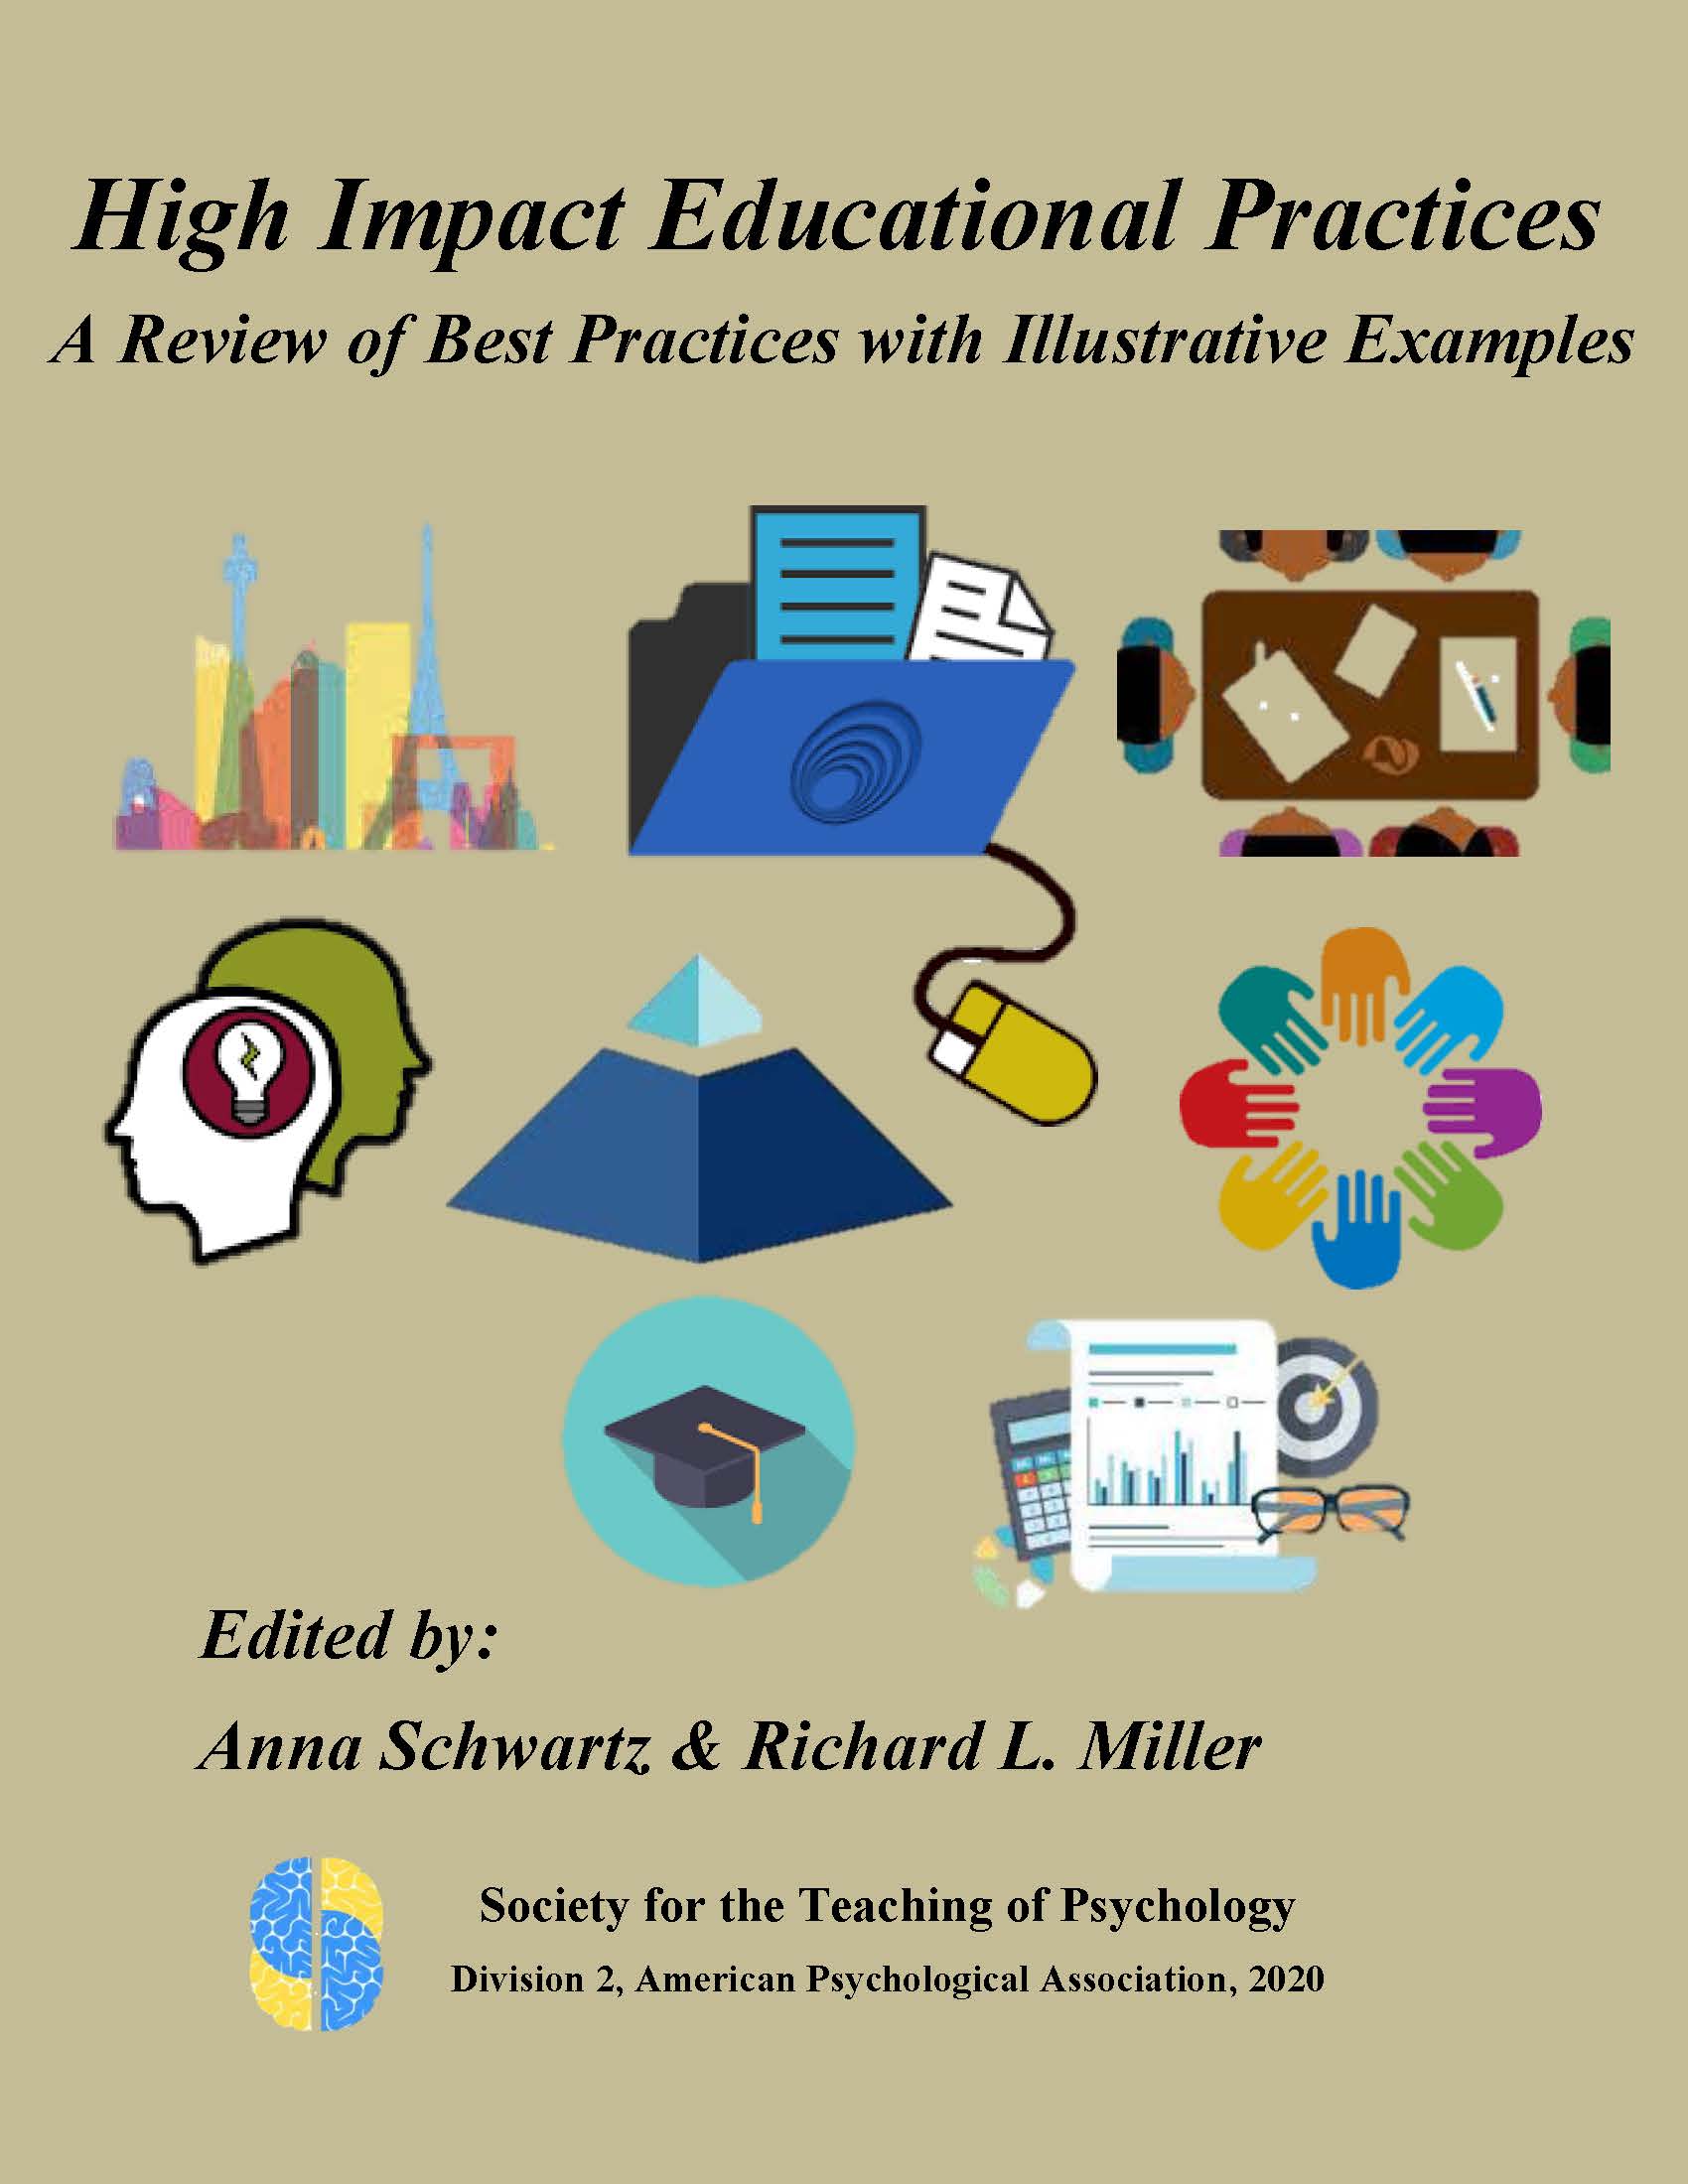 High Impact Educational Practices: A Review of Best Practices with Illustrative Examples 